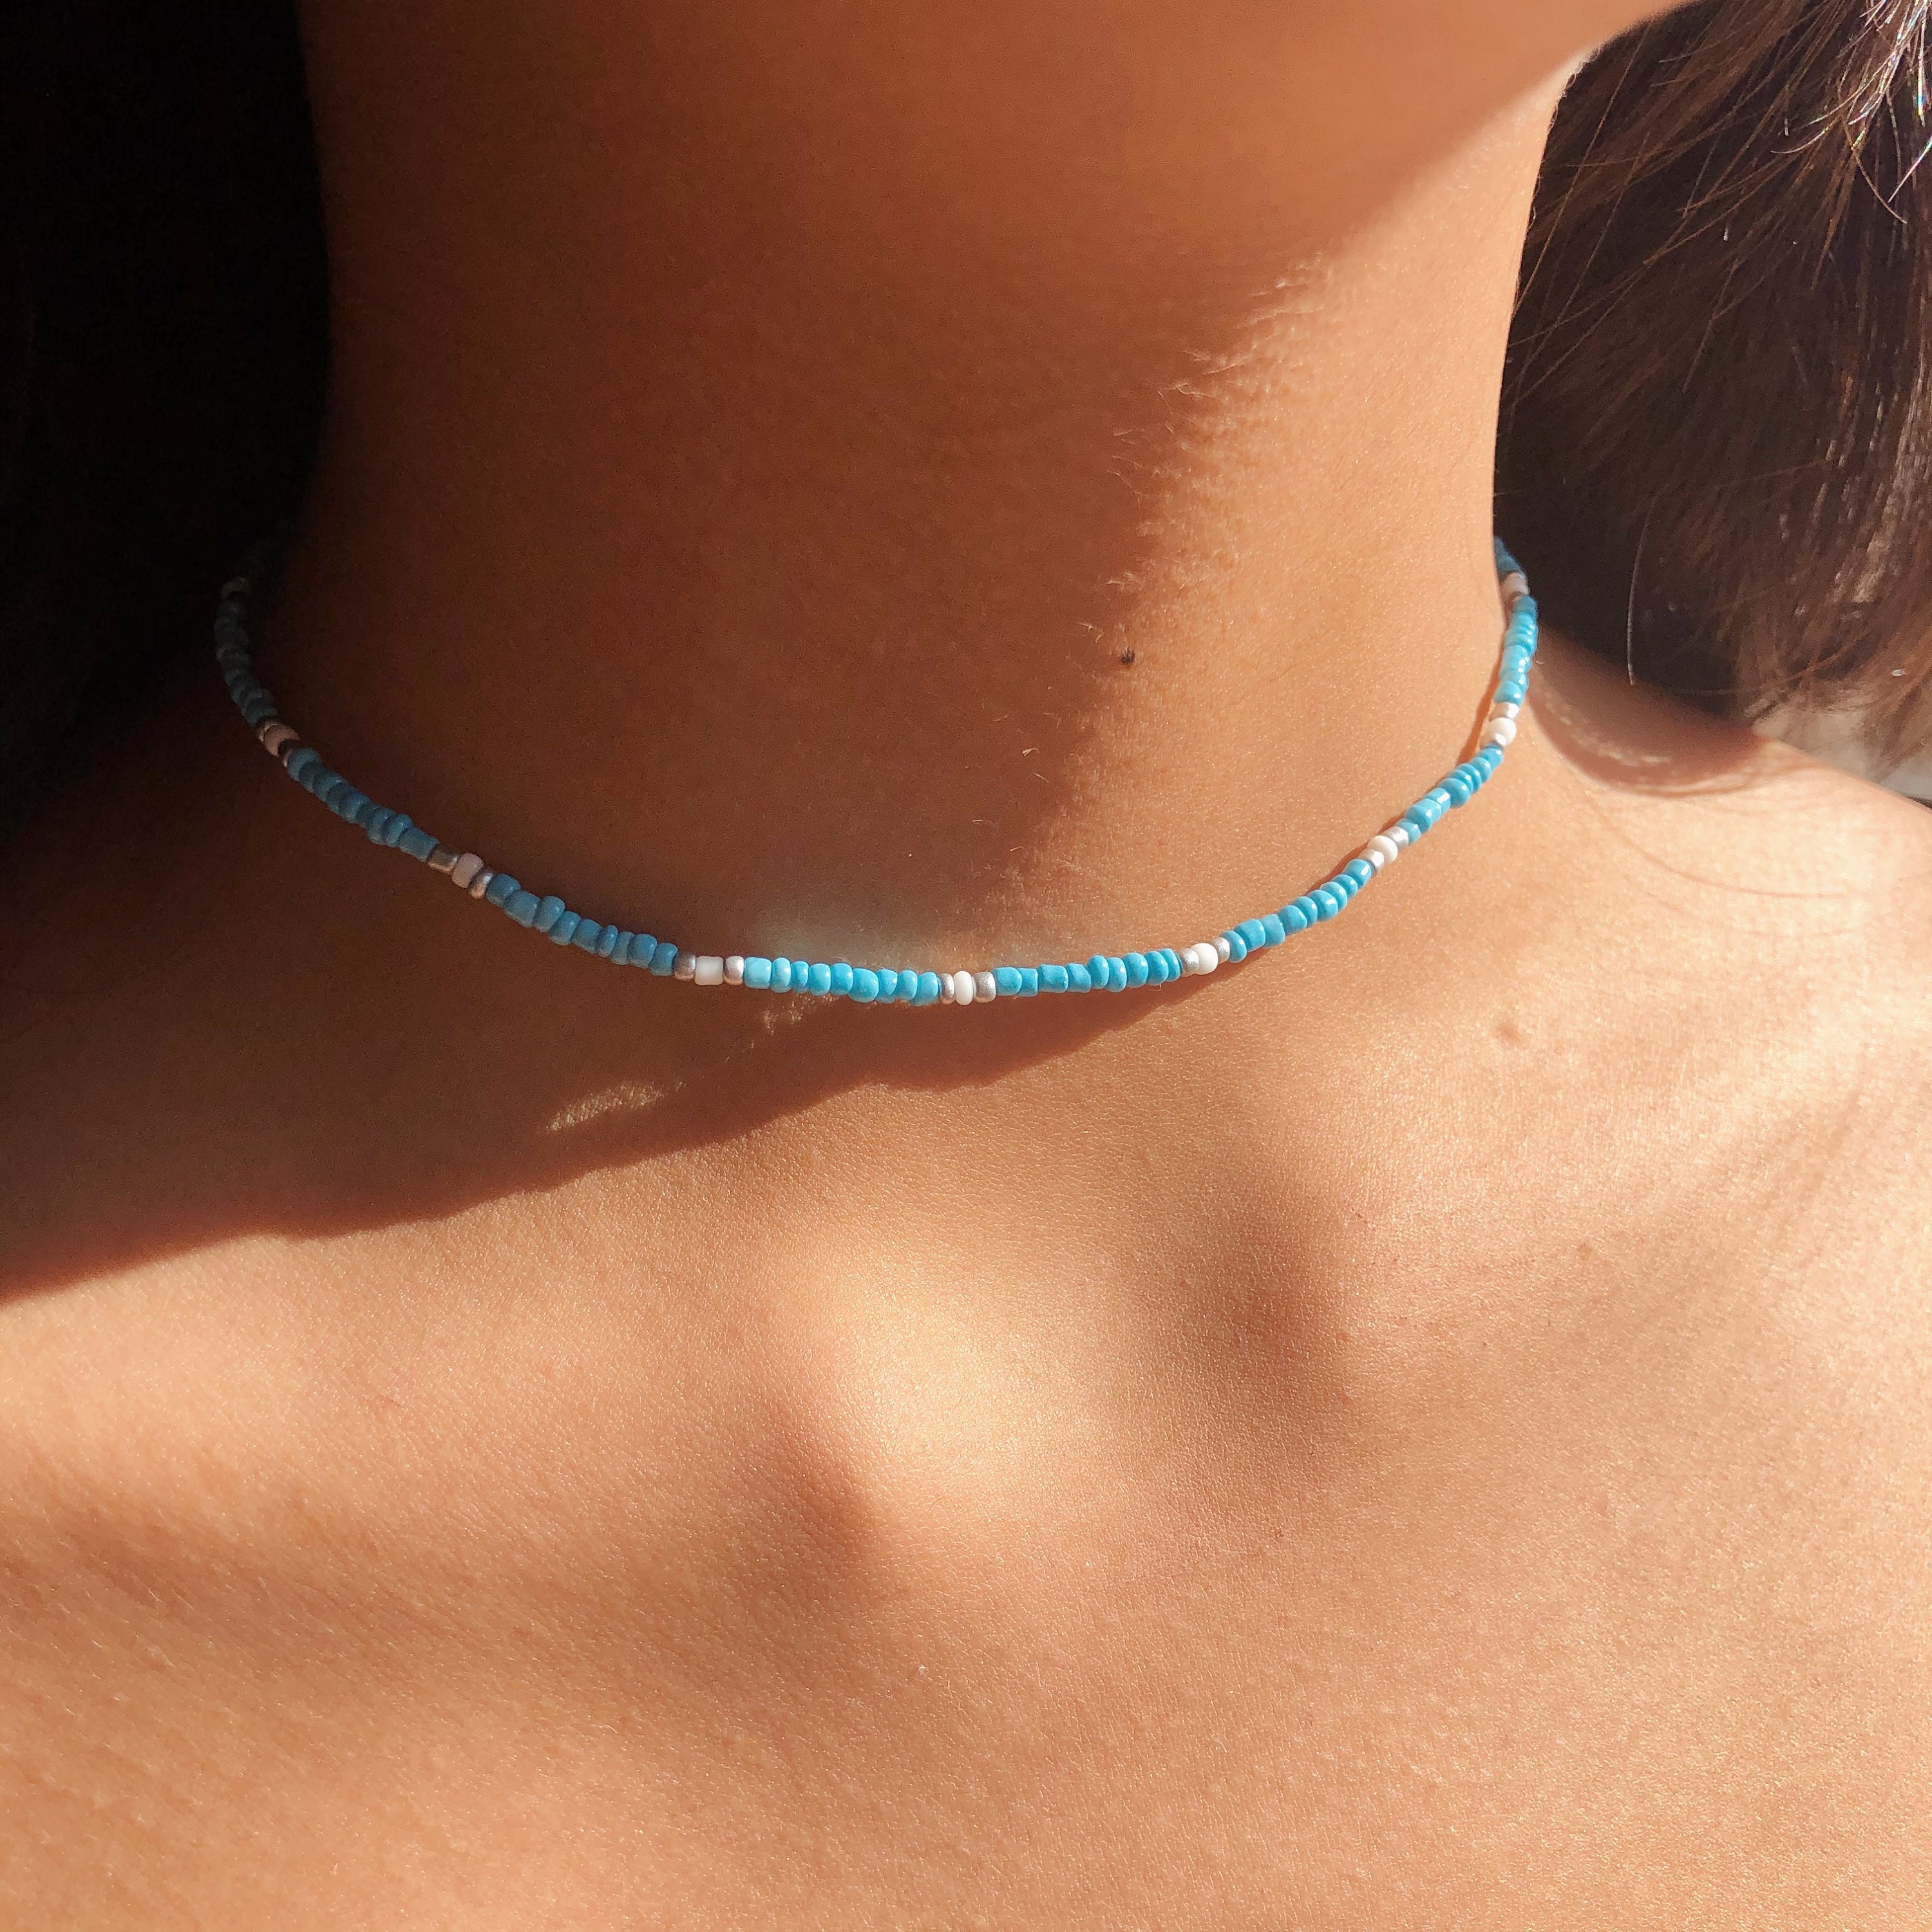 Dainty Blue and White Choker Necklace Summer Beachy - Etsy